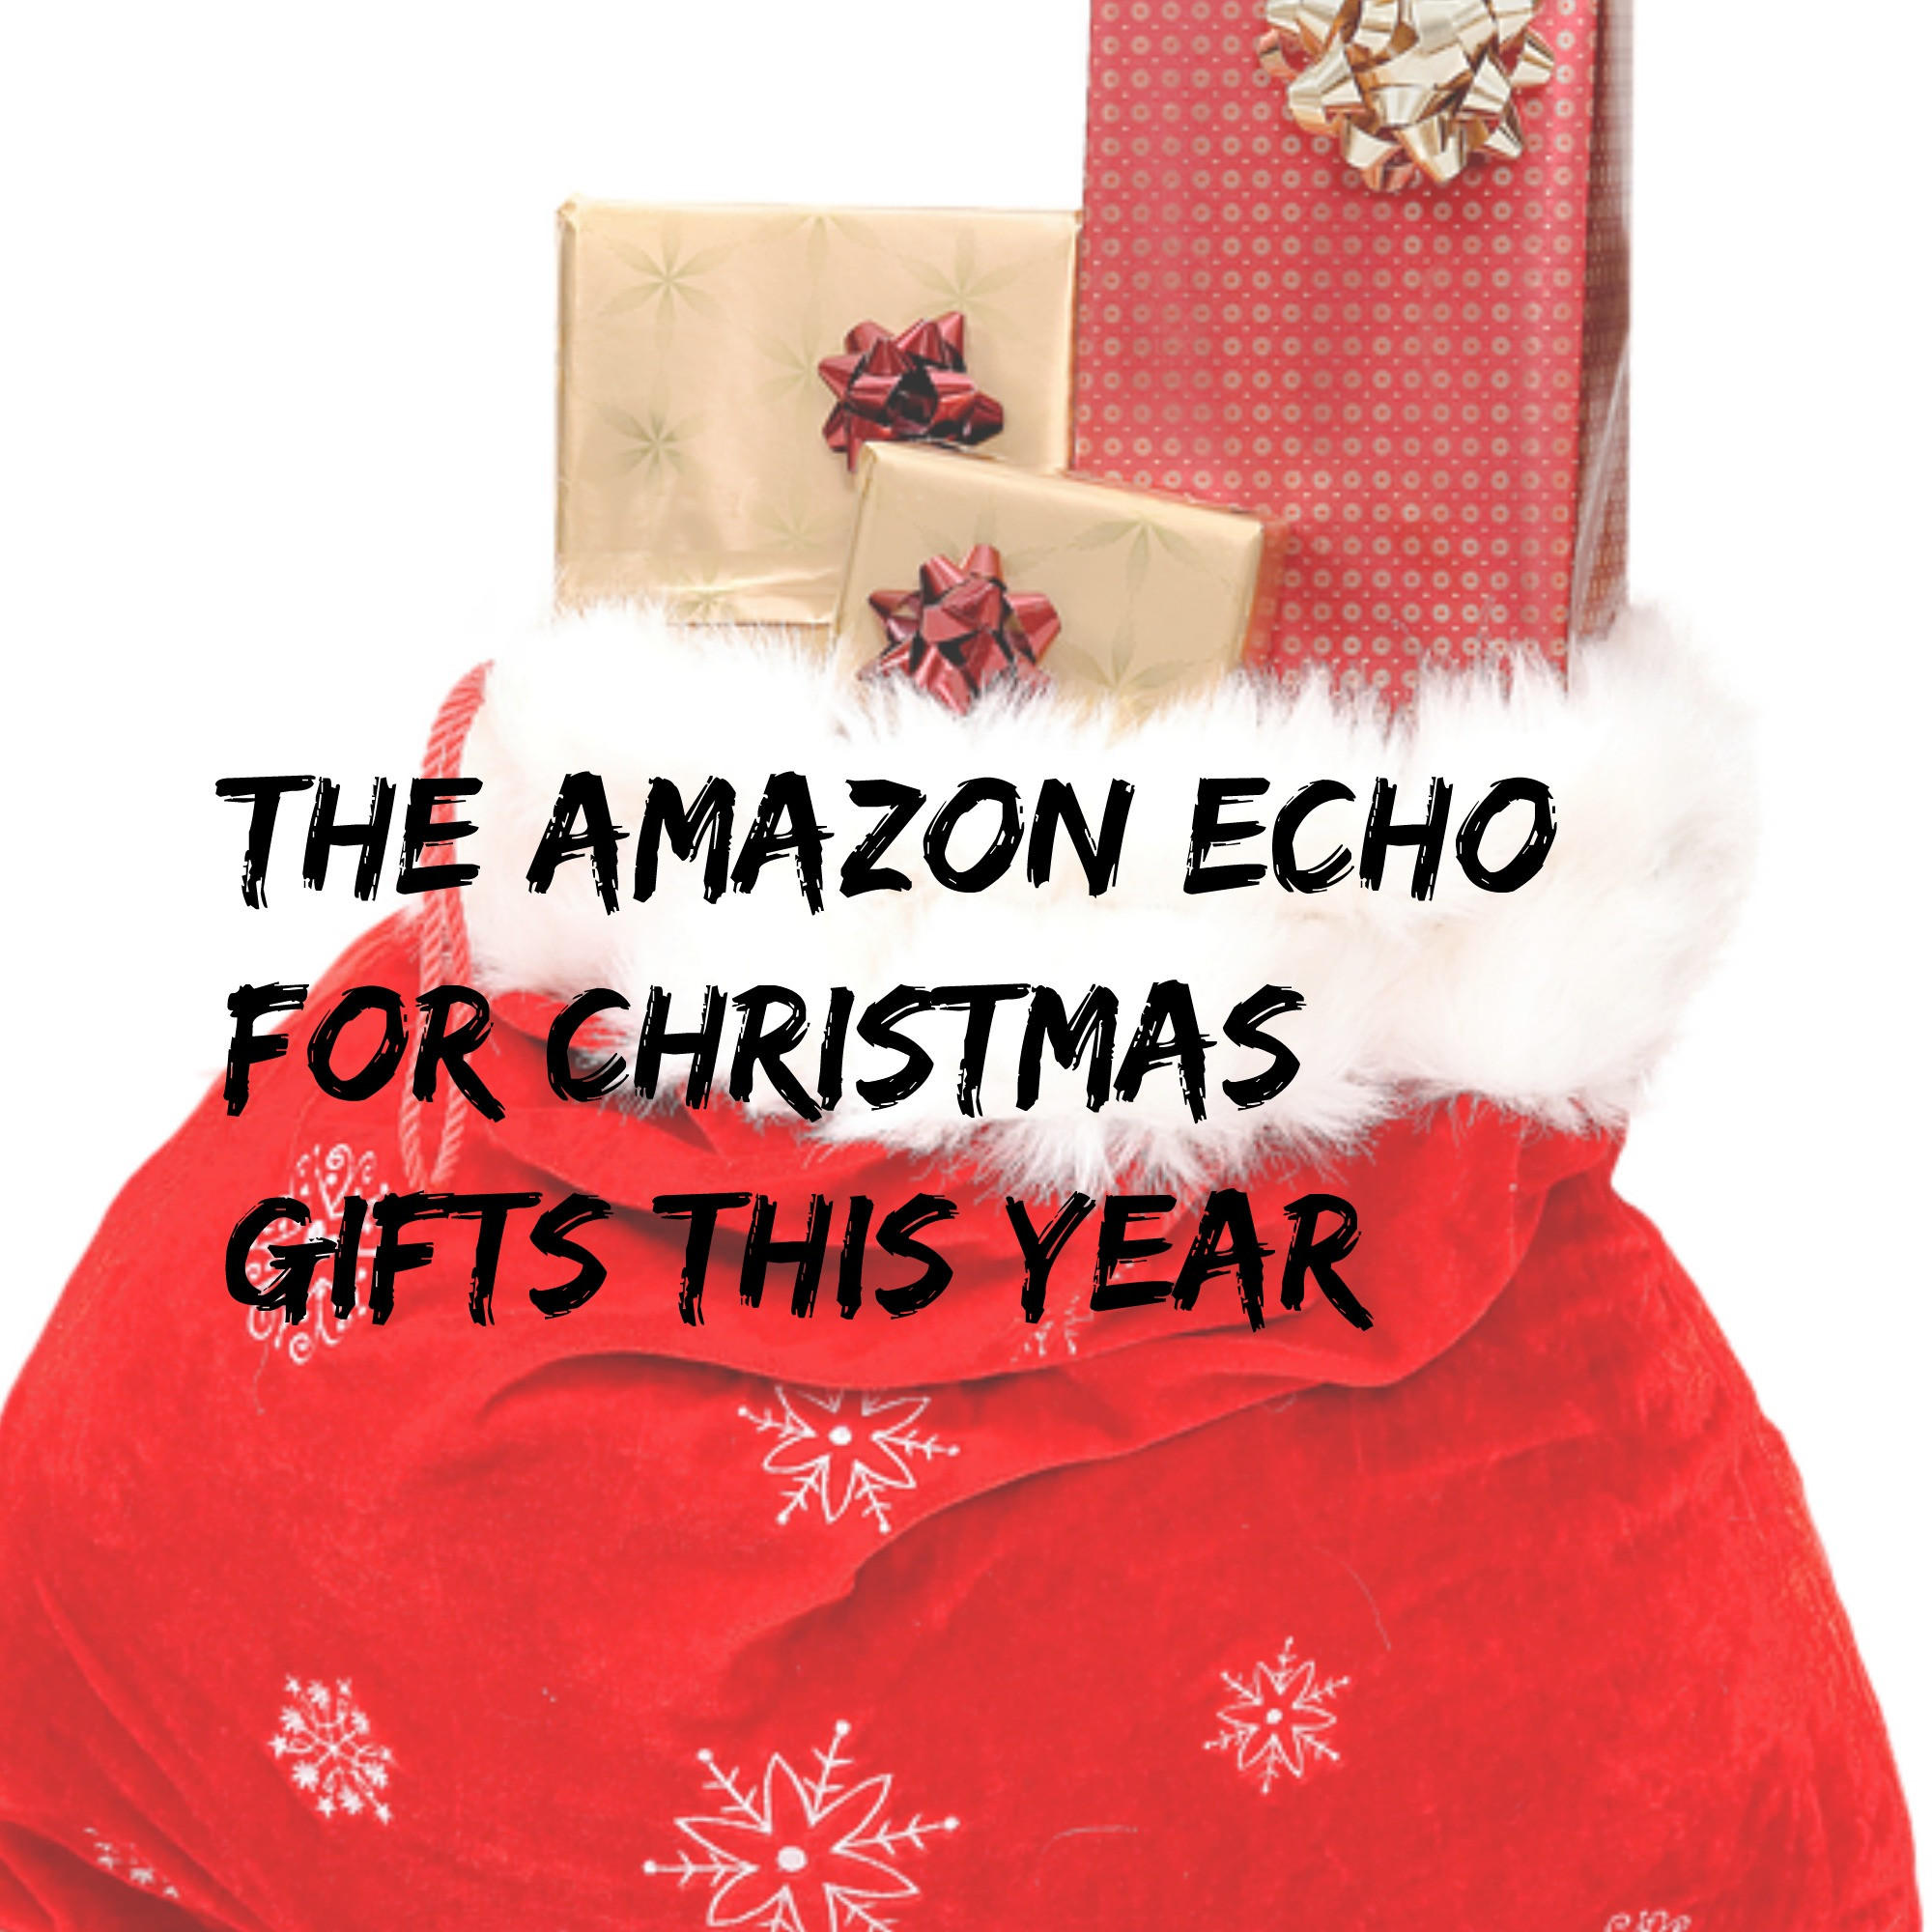 Amazon Christmas Gift Ideas
 The Amazon Echo For Christmas Gifts This YearLife After 60